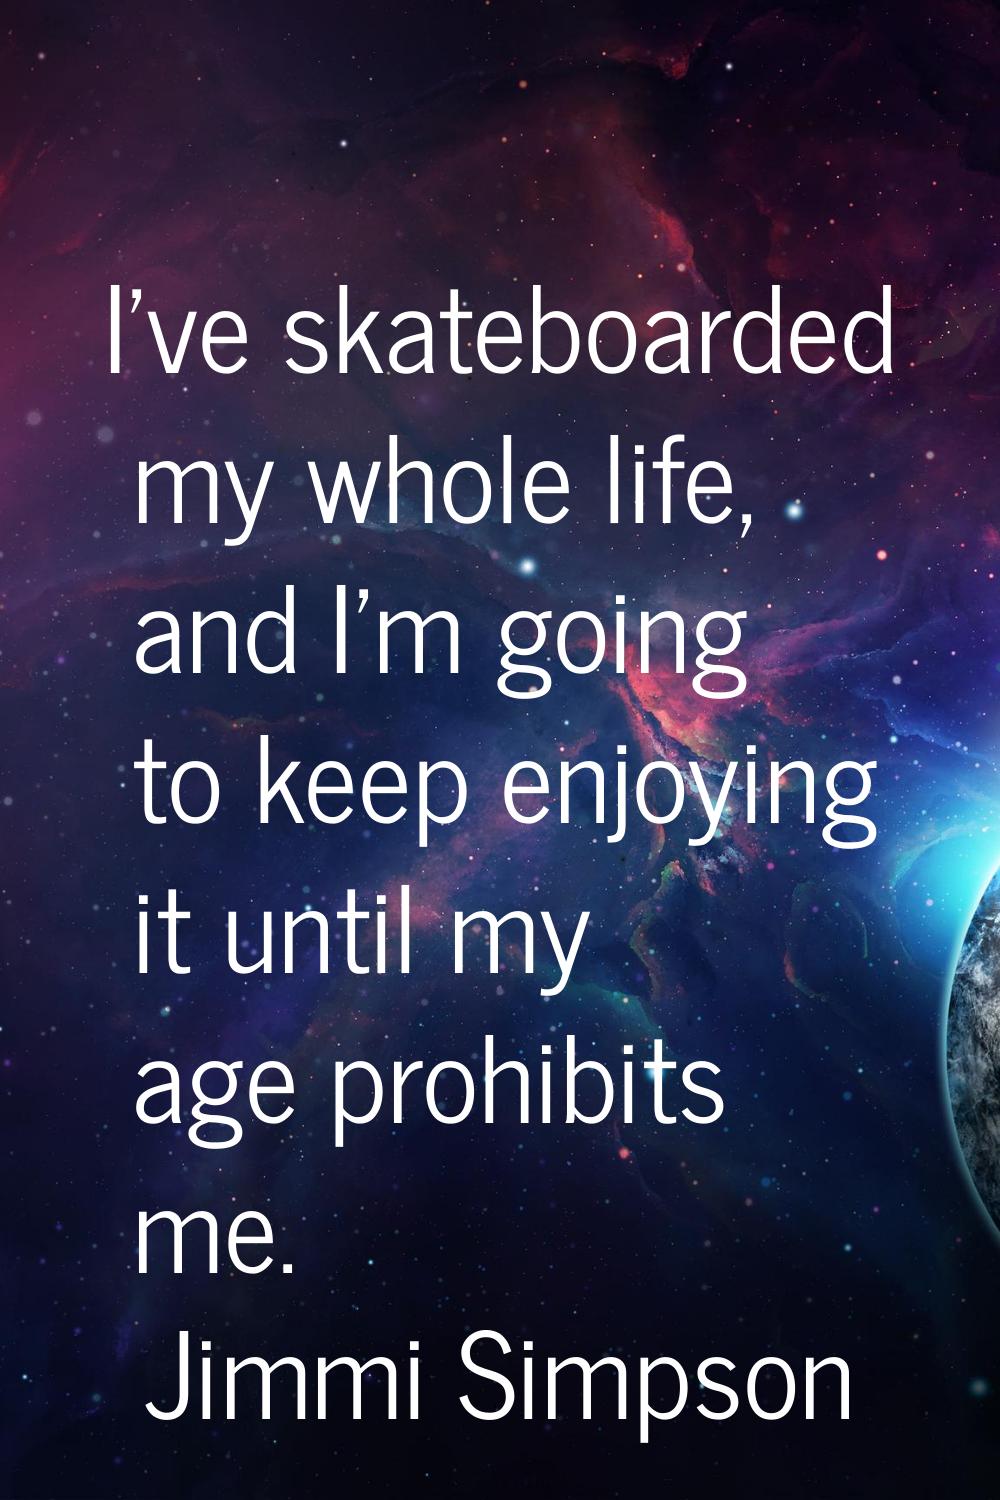 I've skateboarded my whole life, and I'm going to keep enjoying it until my age prohibits me.